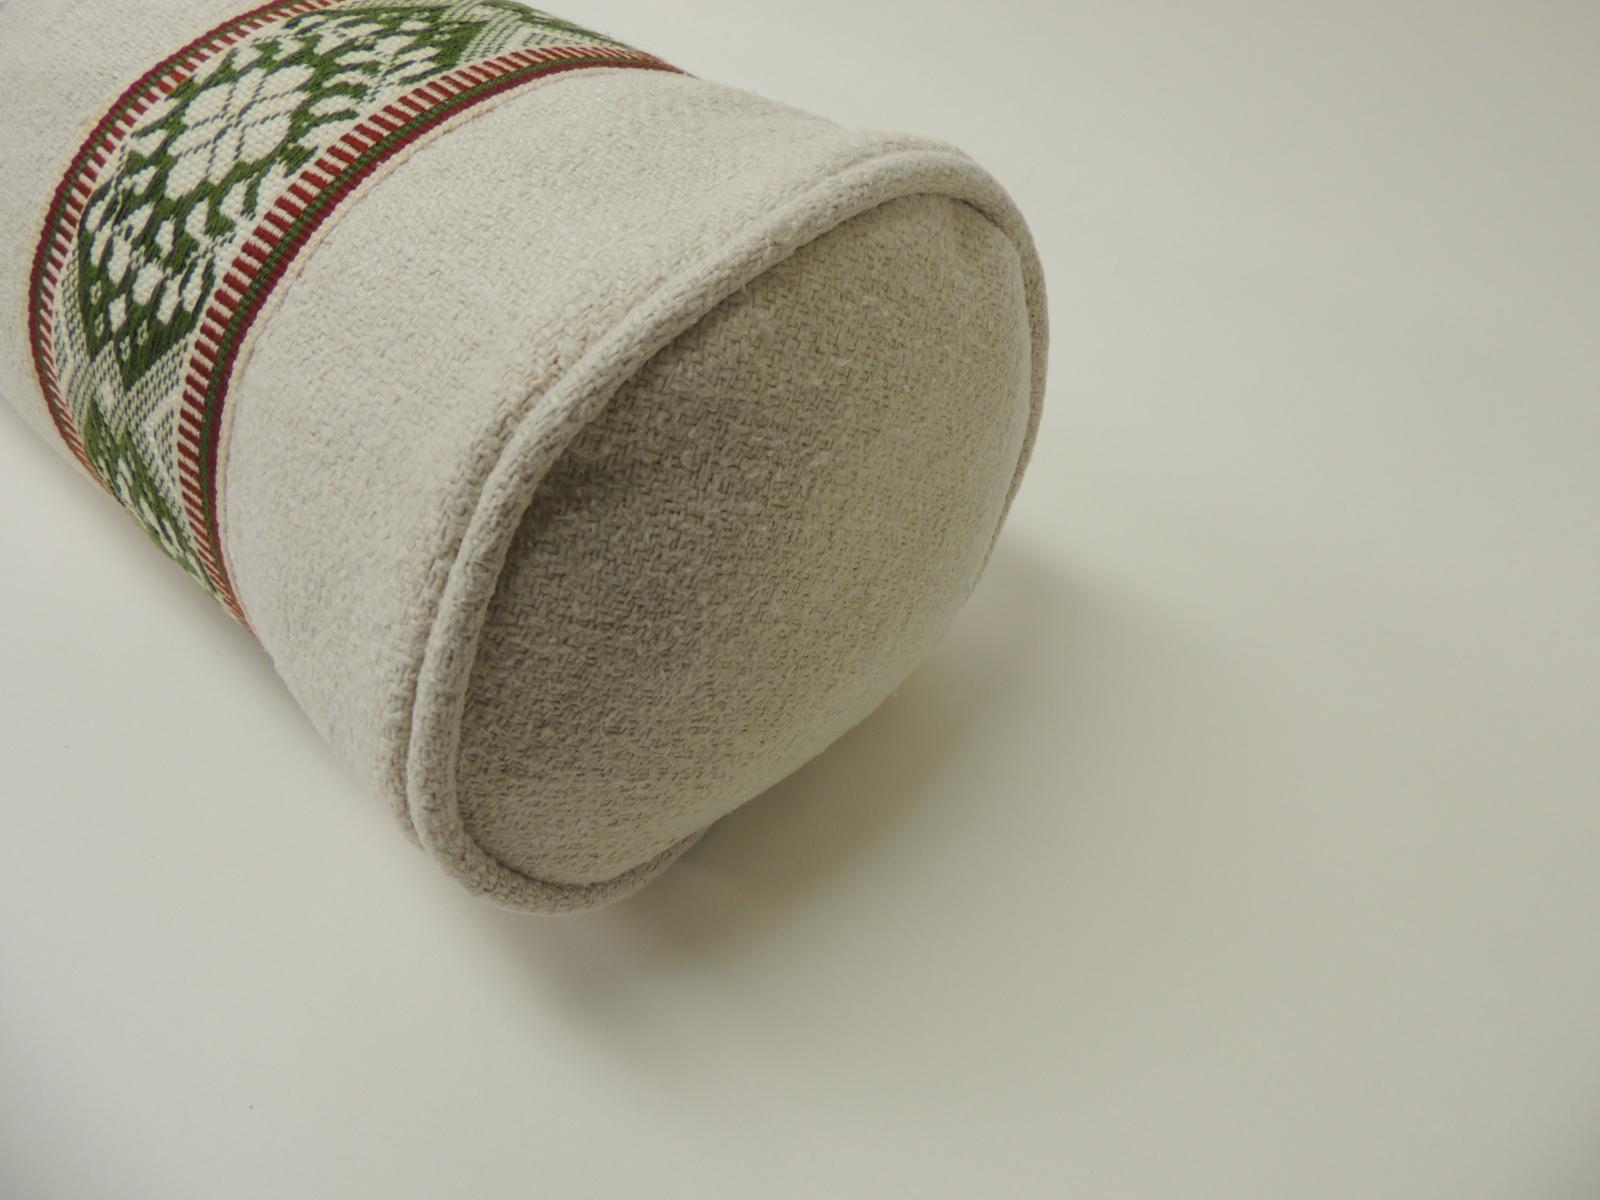 Country Vintage Green and Natural Woven Trim Decorative Round Roll Bolster Pillow